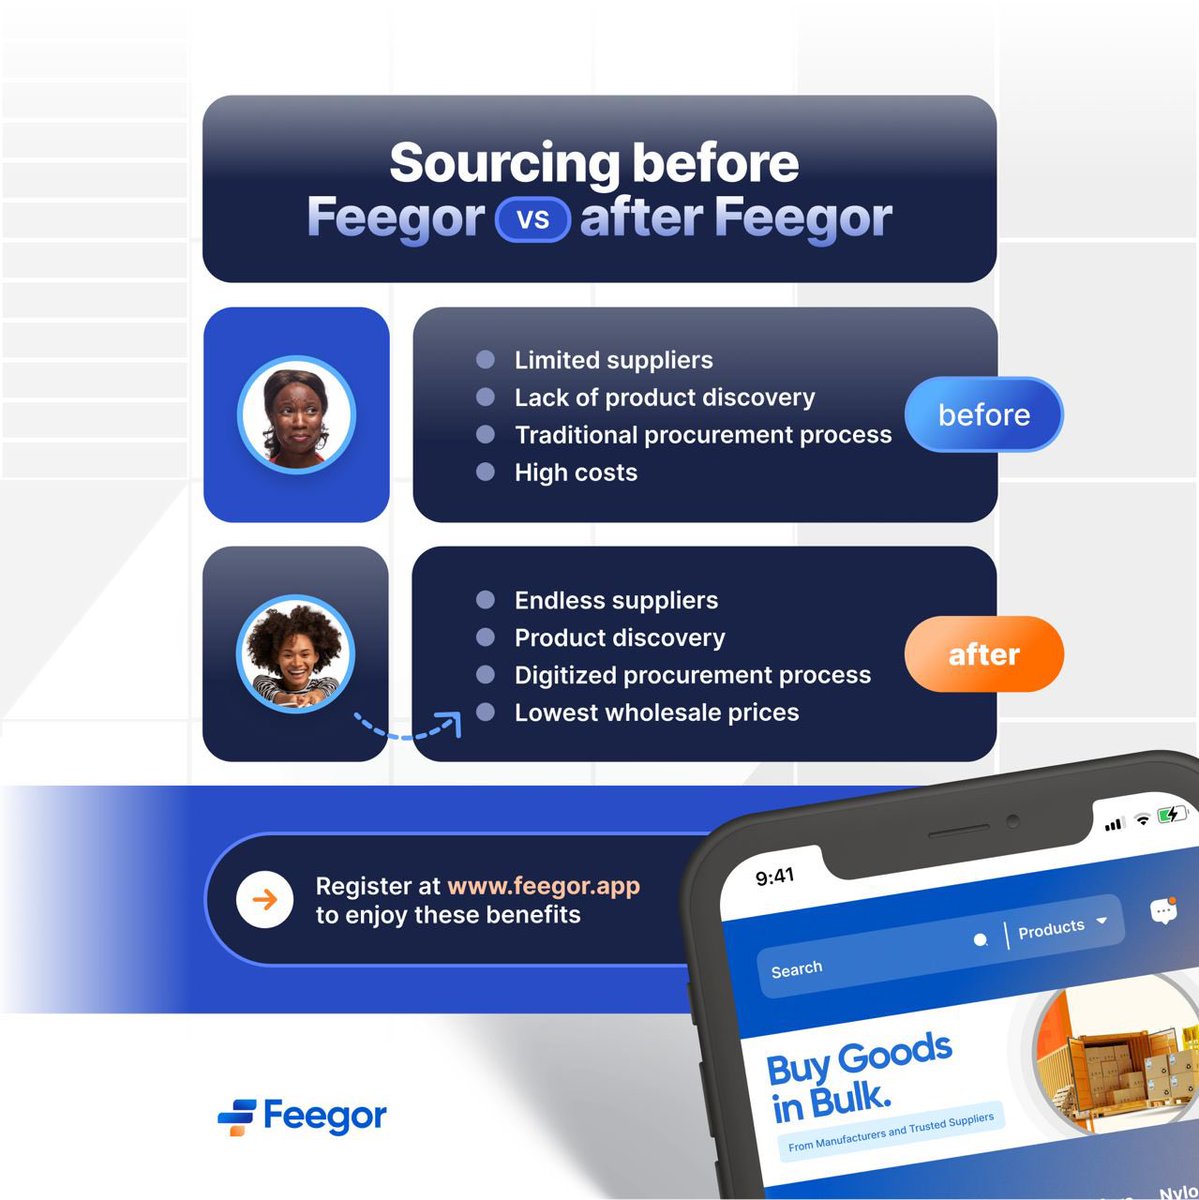 Eradicate so many challenges as a business owner that’s into buying and selling by tapping into the endless possibilities of what @feegor_app can do to your business. 

Over 240 various products you can buy in bulk at a low cost, rather than stressing to the market 

#BuyInBulk